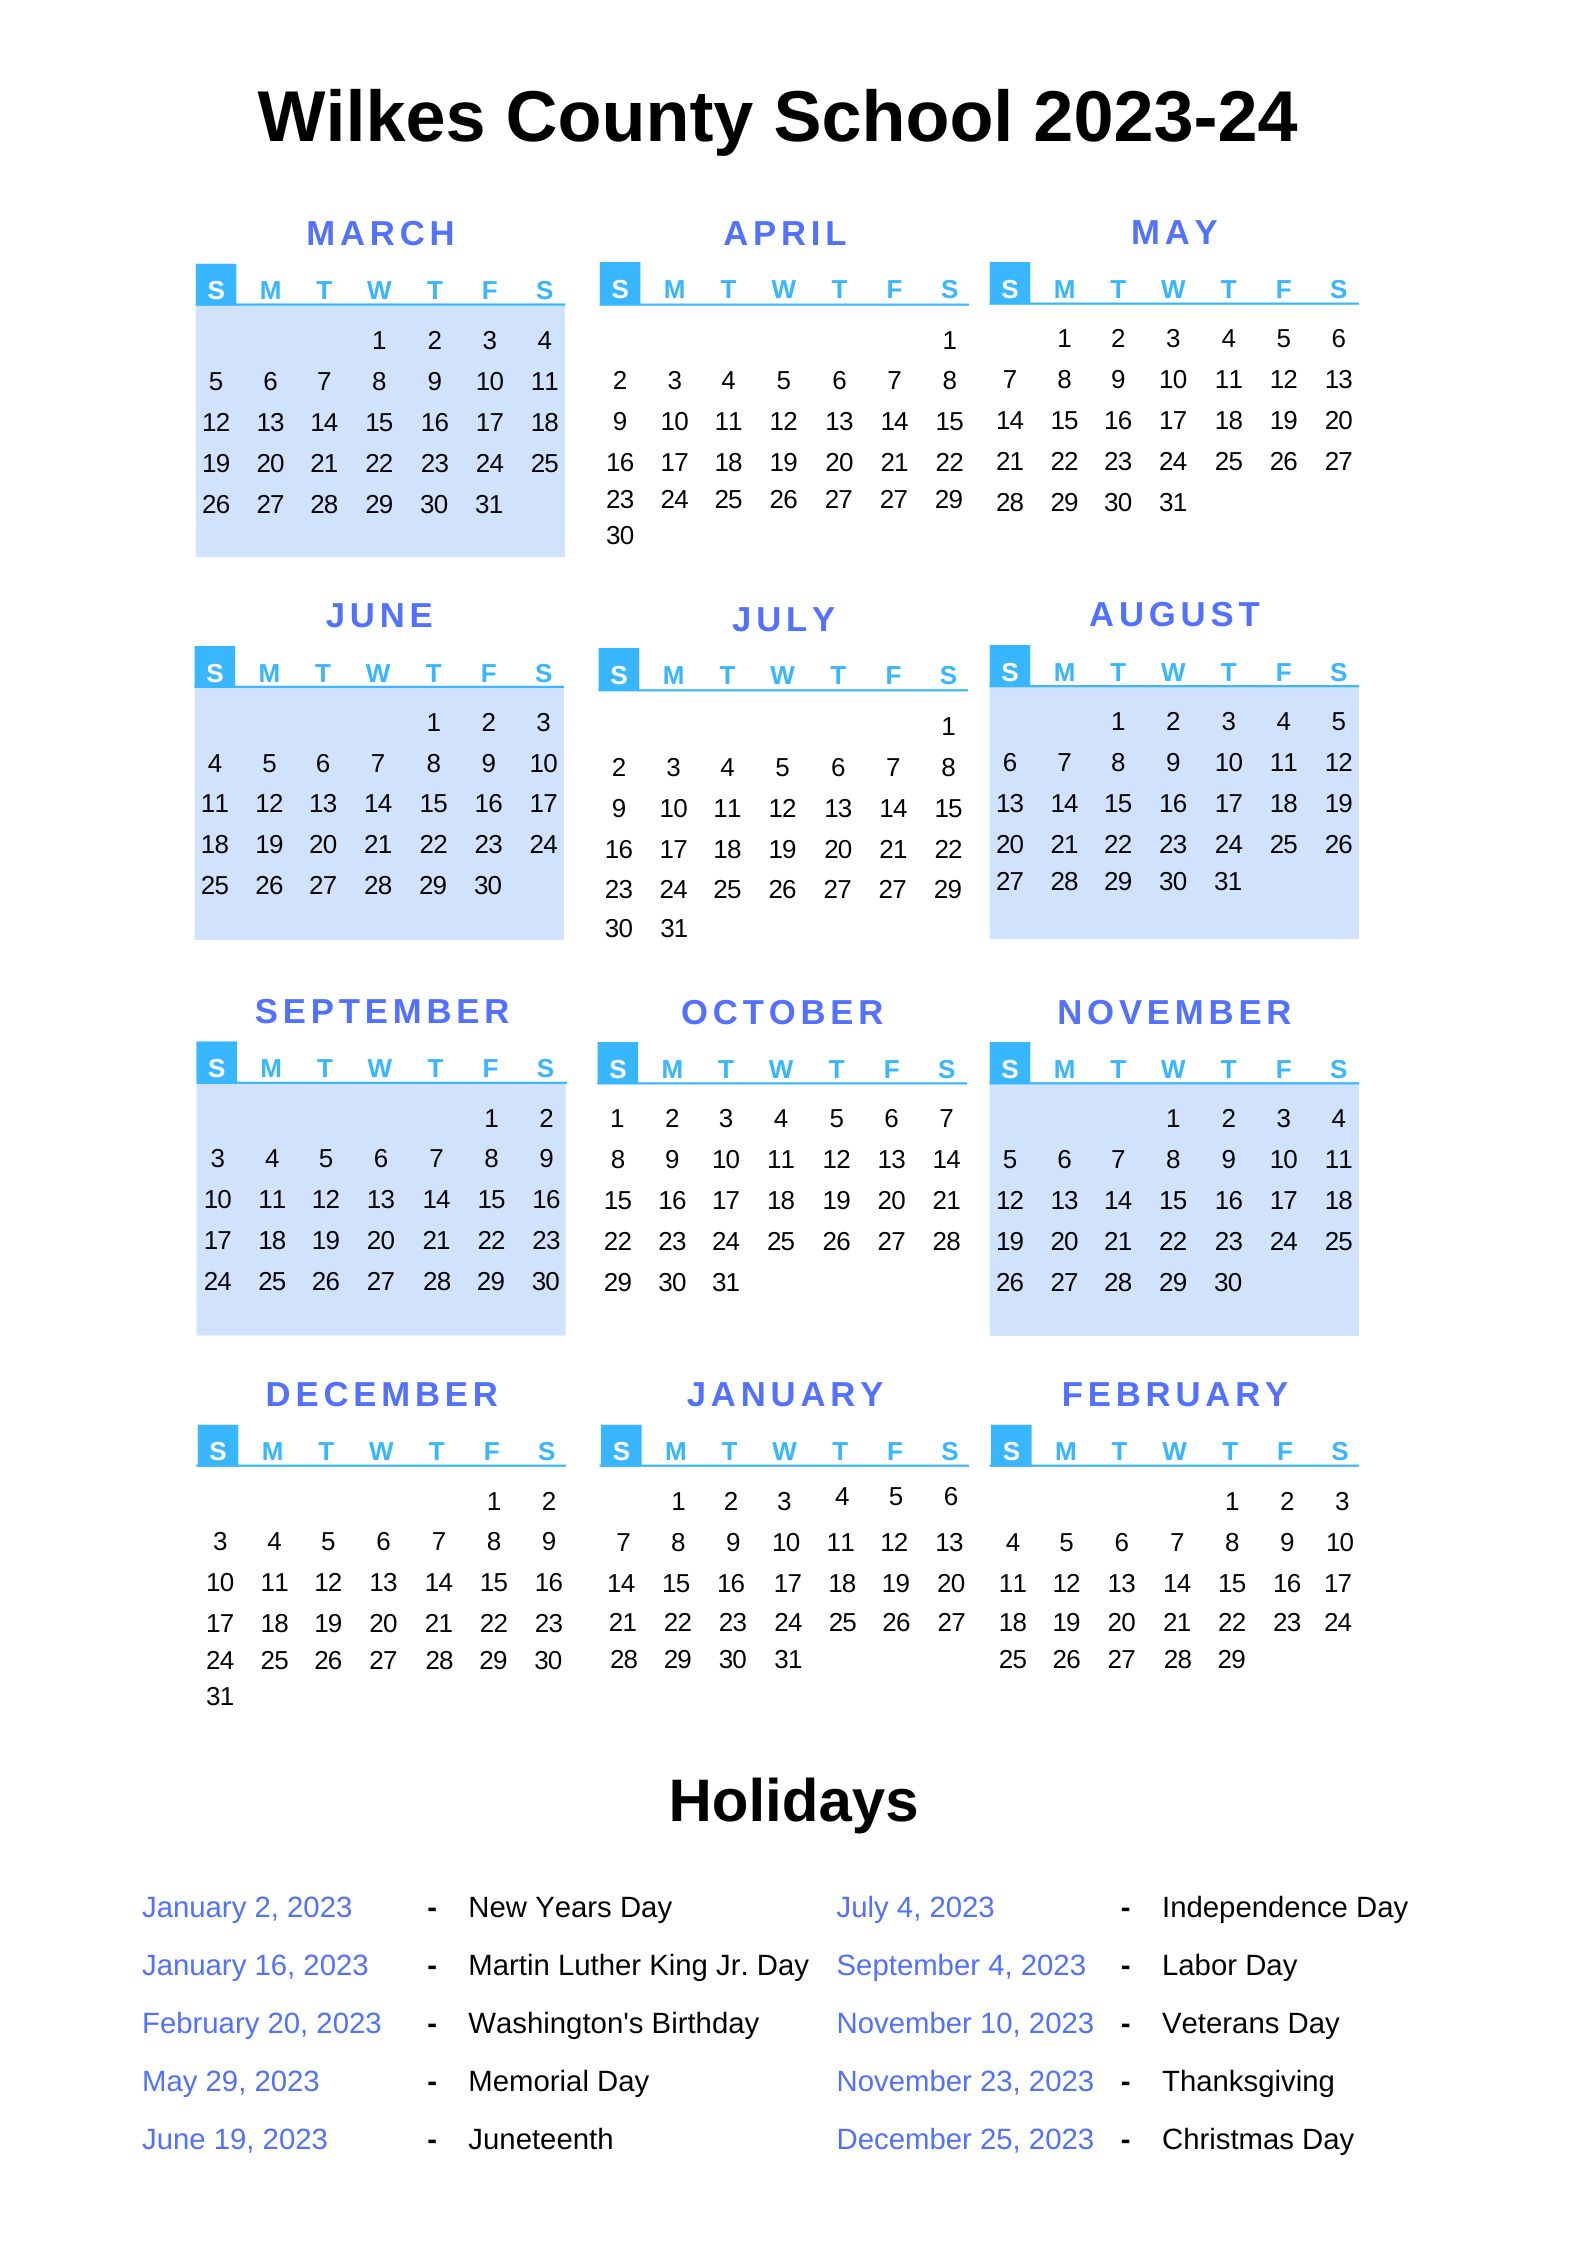 Wilkes County Schools Calendar 2023 24 With Holidays